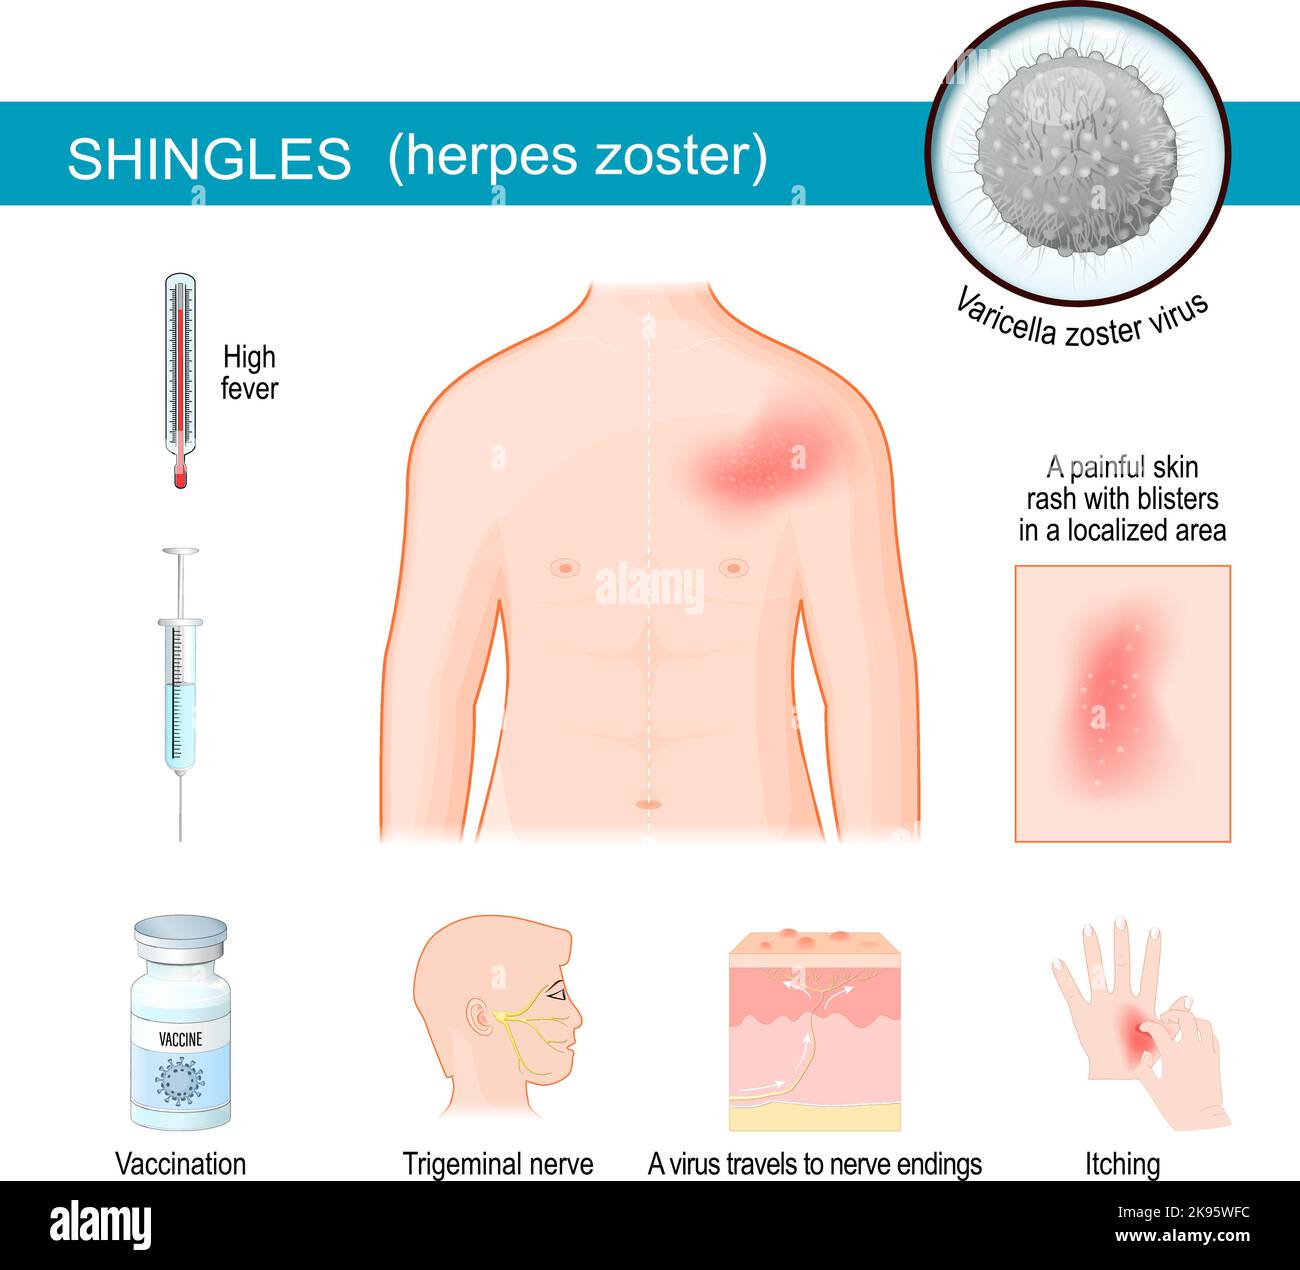 Shingles. infographics about Signs and symptoms of herpes zoster. Human torso with itching rash. Close-up of Varicella zoster virus. Stock Vector